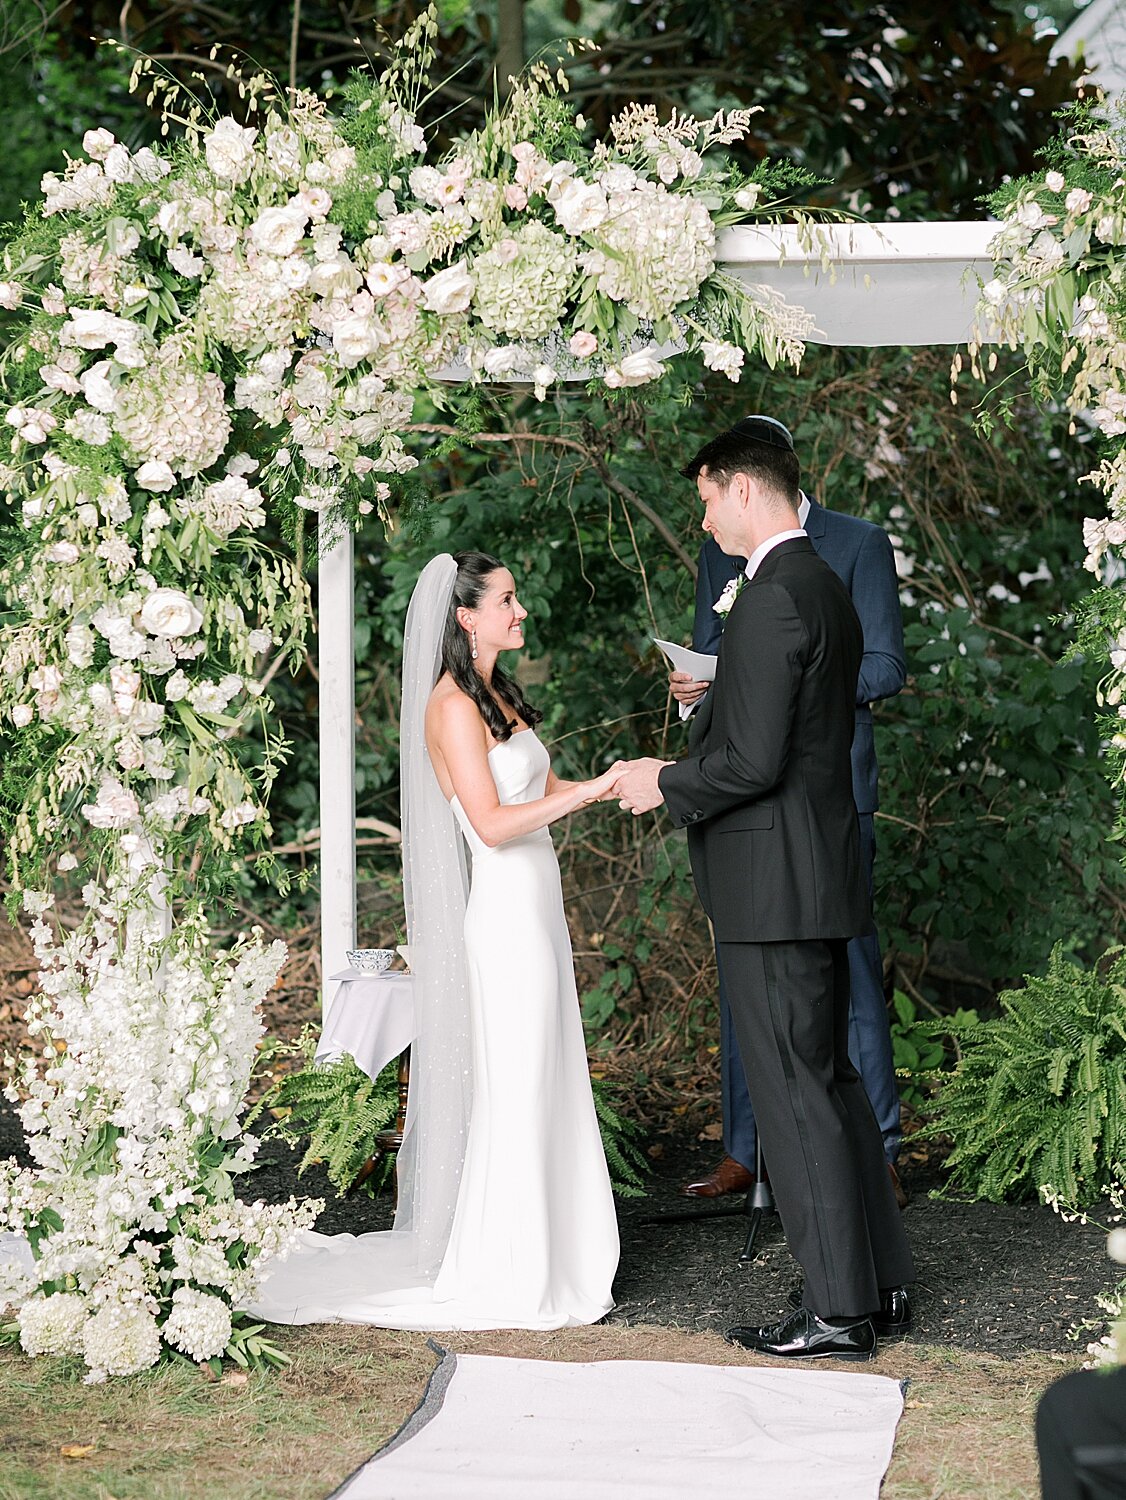 wedding ceremony at home | Stylish Private Home Wedding Inspiration | Asher Gardner Photography